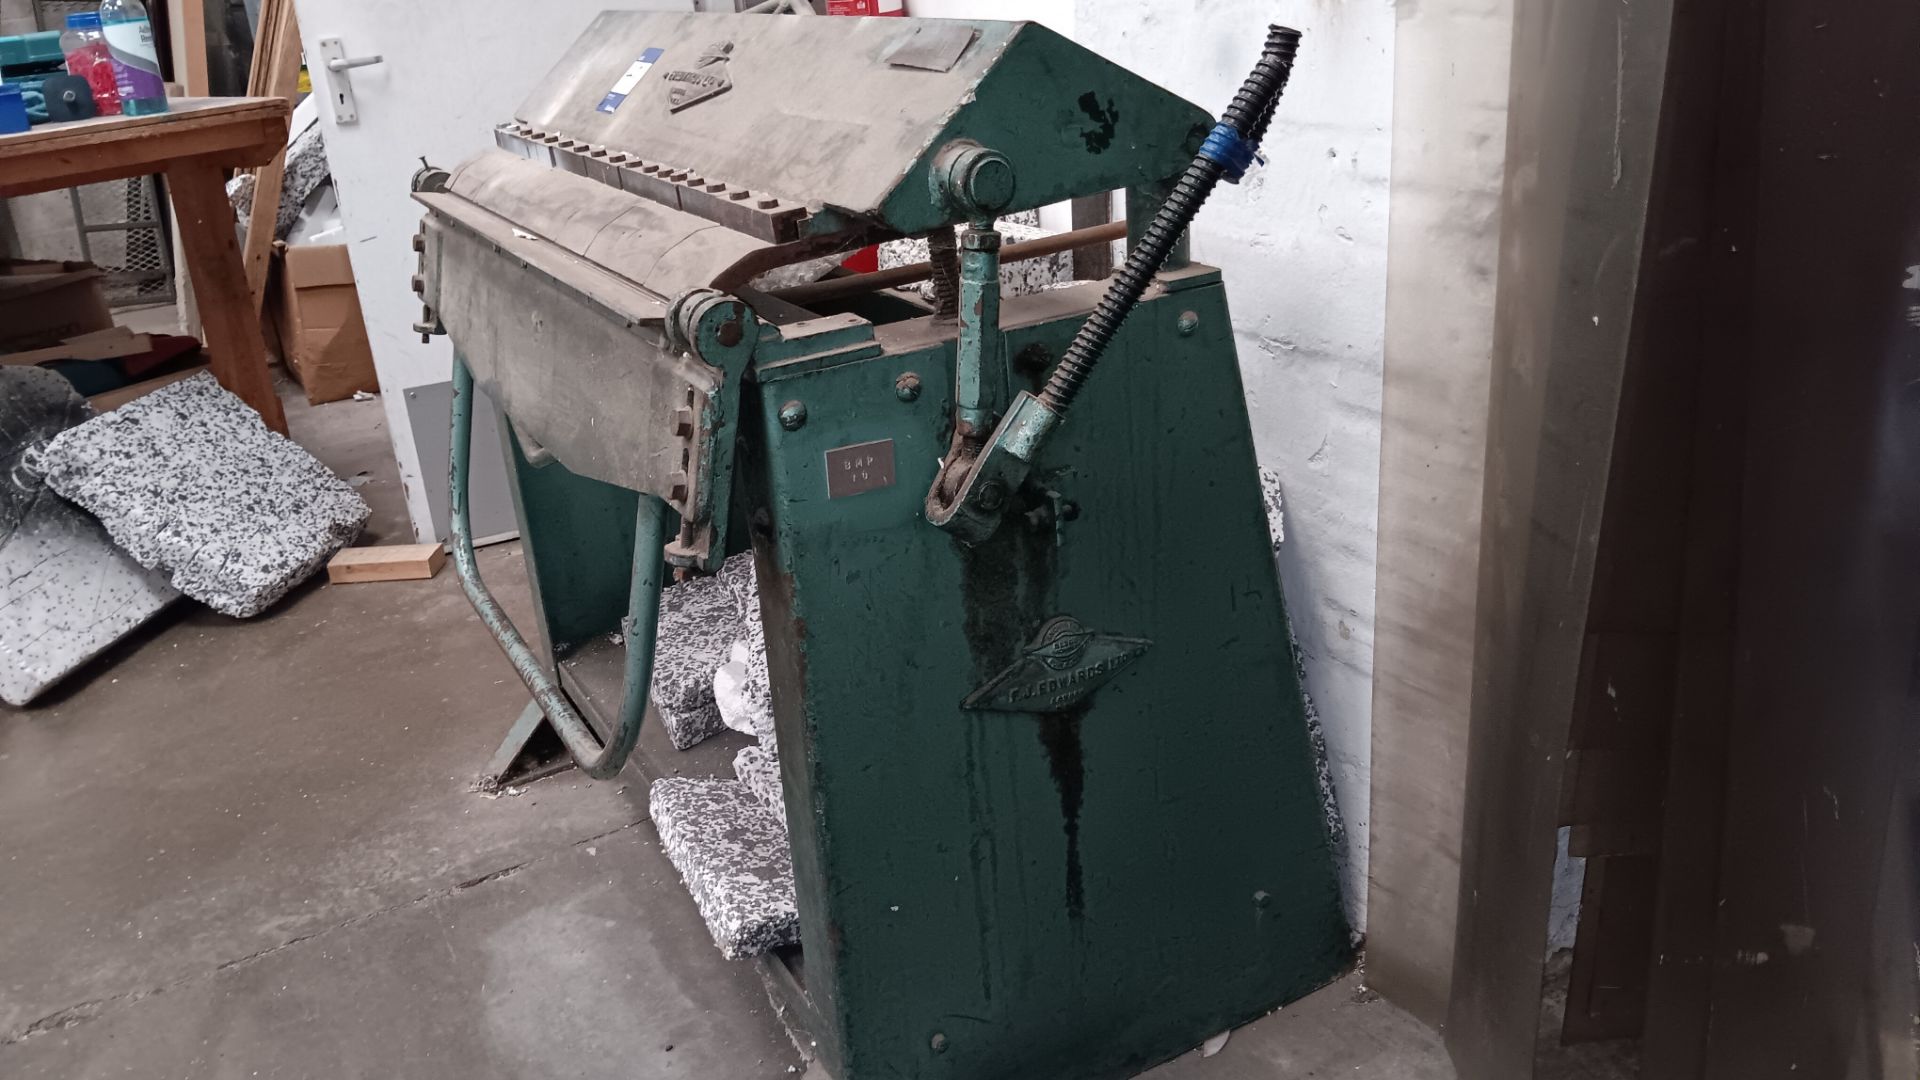 FJ Edwards 3 foot box and pan folder, serial number 05867 – Located in Unit 3 - Bild 2 aus 8